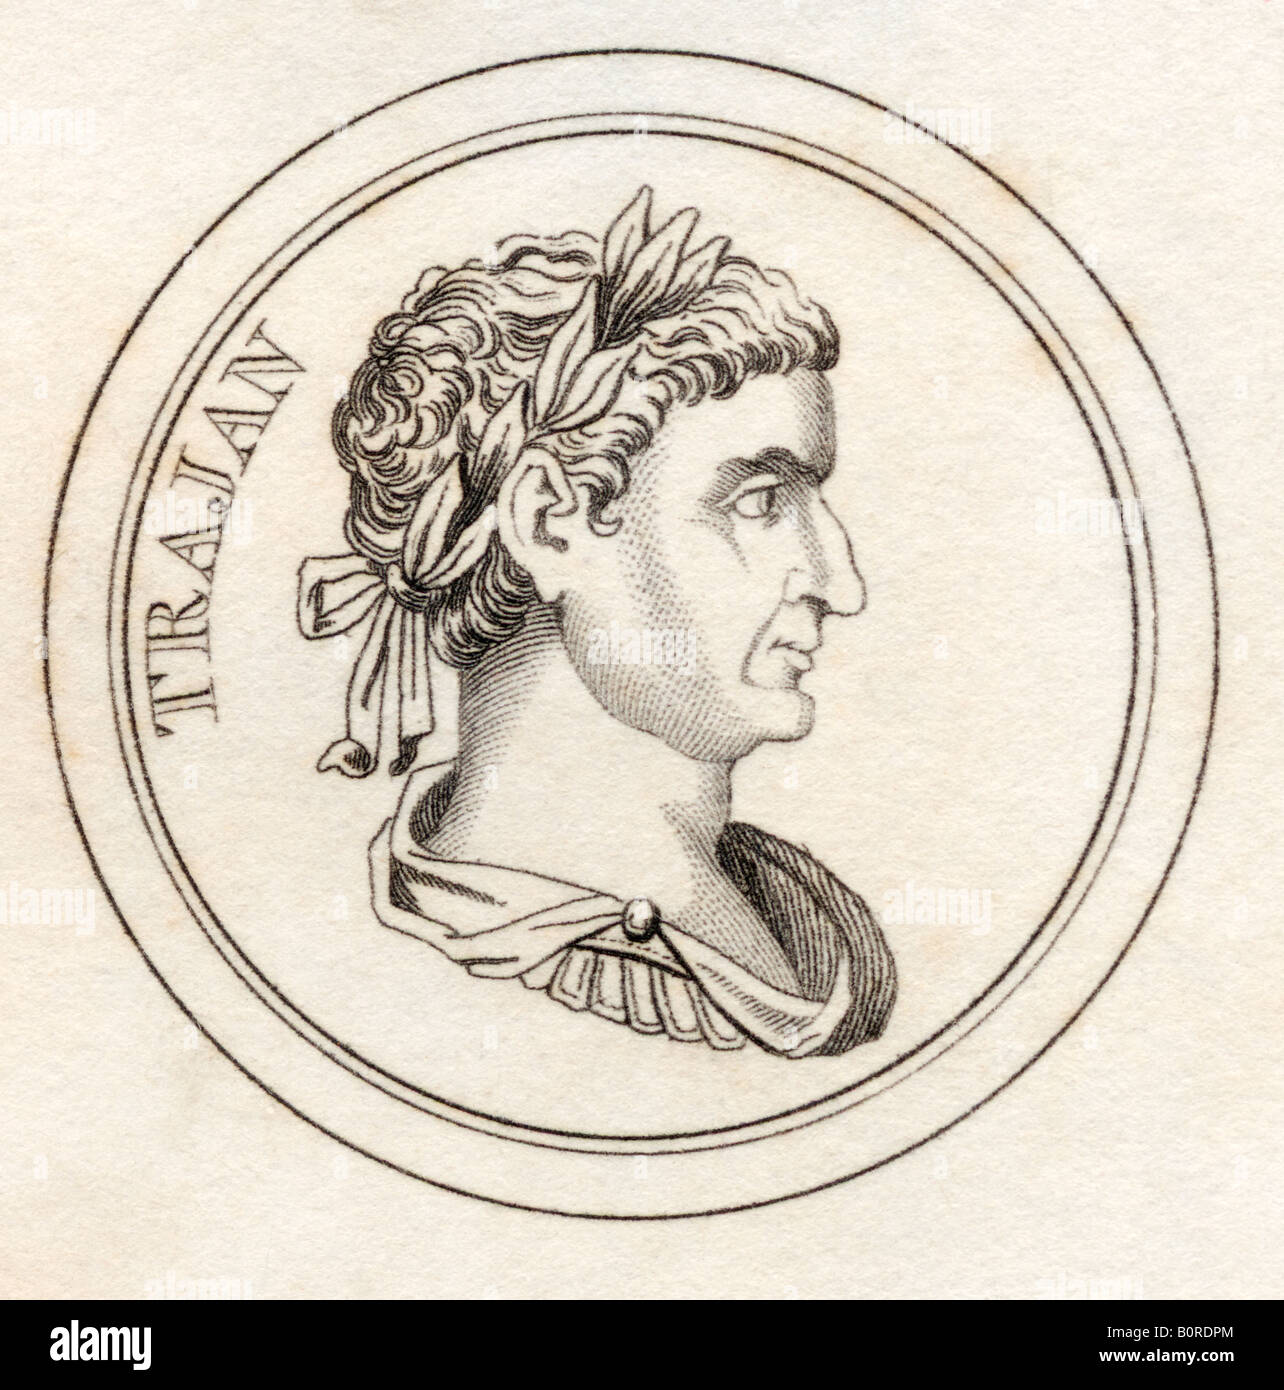 Trajan, Marcus Ulpius Nerva Traianus, AD53 - 117. Roman Emperor.  From the book Crabbs Historical Dictionary, published 1825. Stock Photo